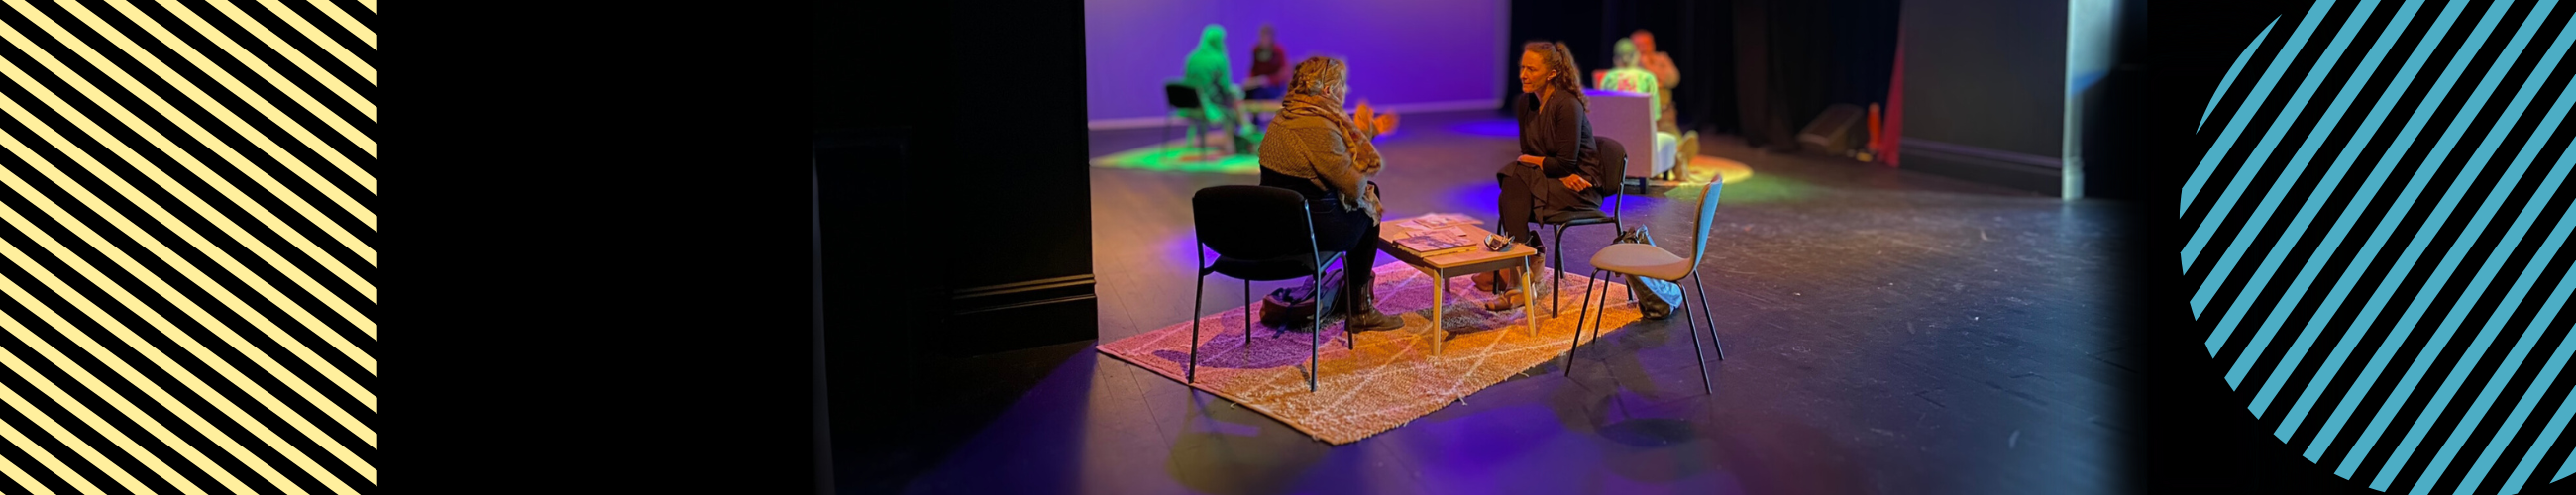 3 tables of two people talking on a stage area with purple and yellow lighting.